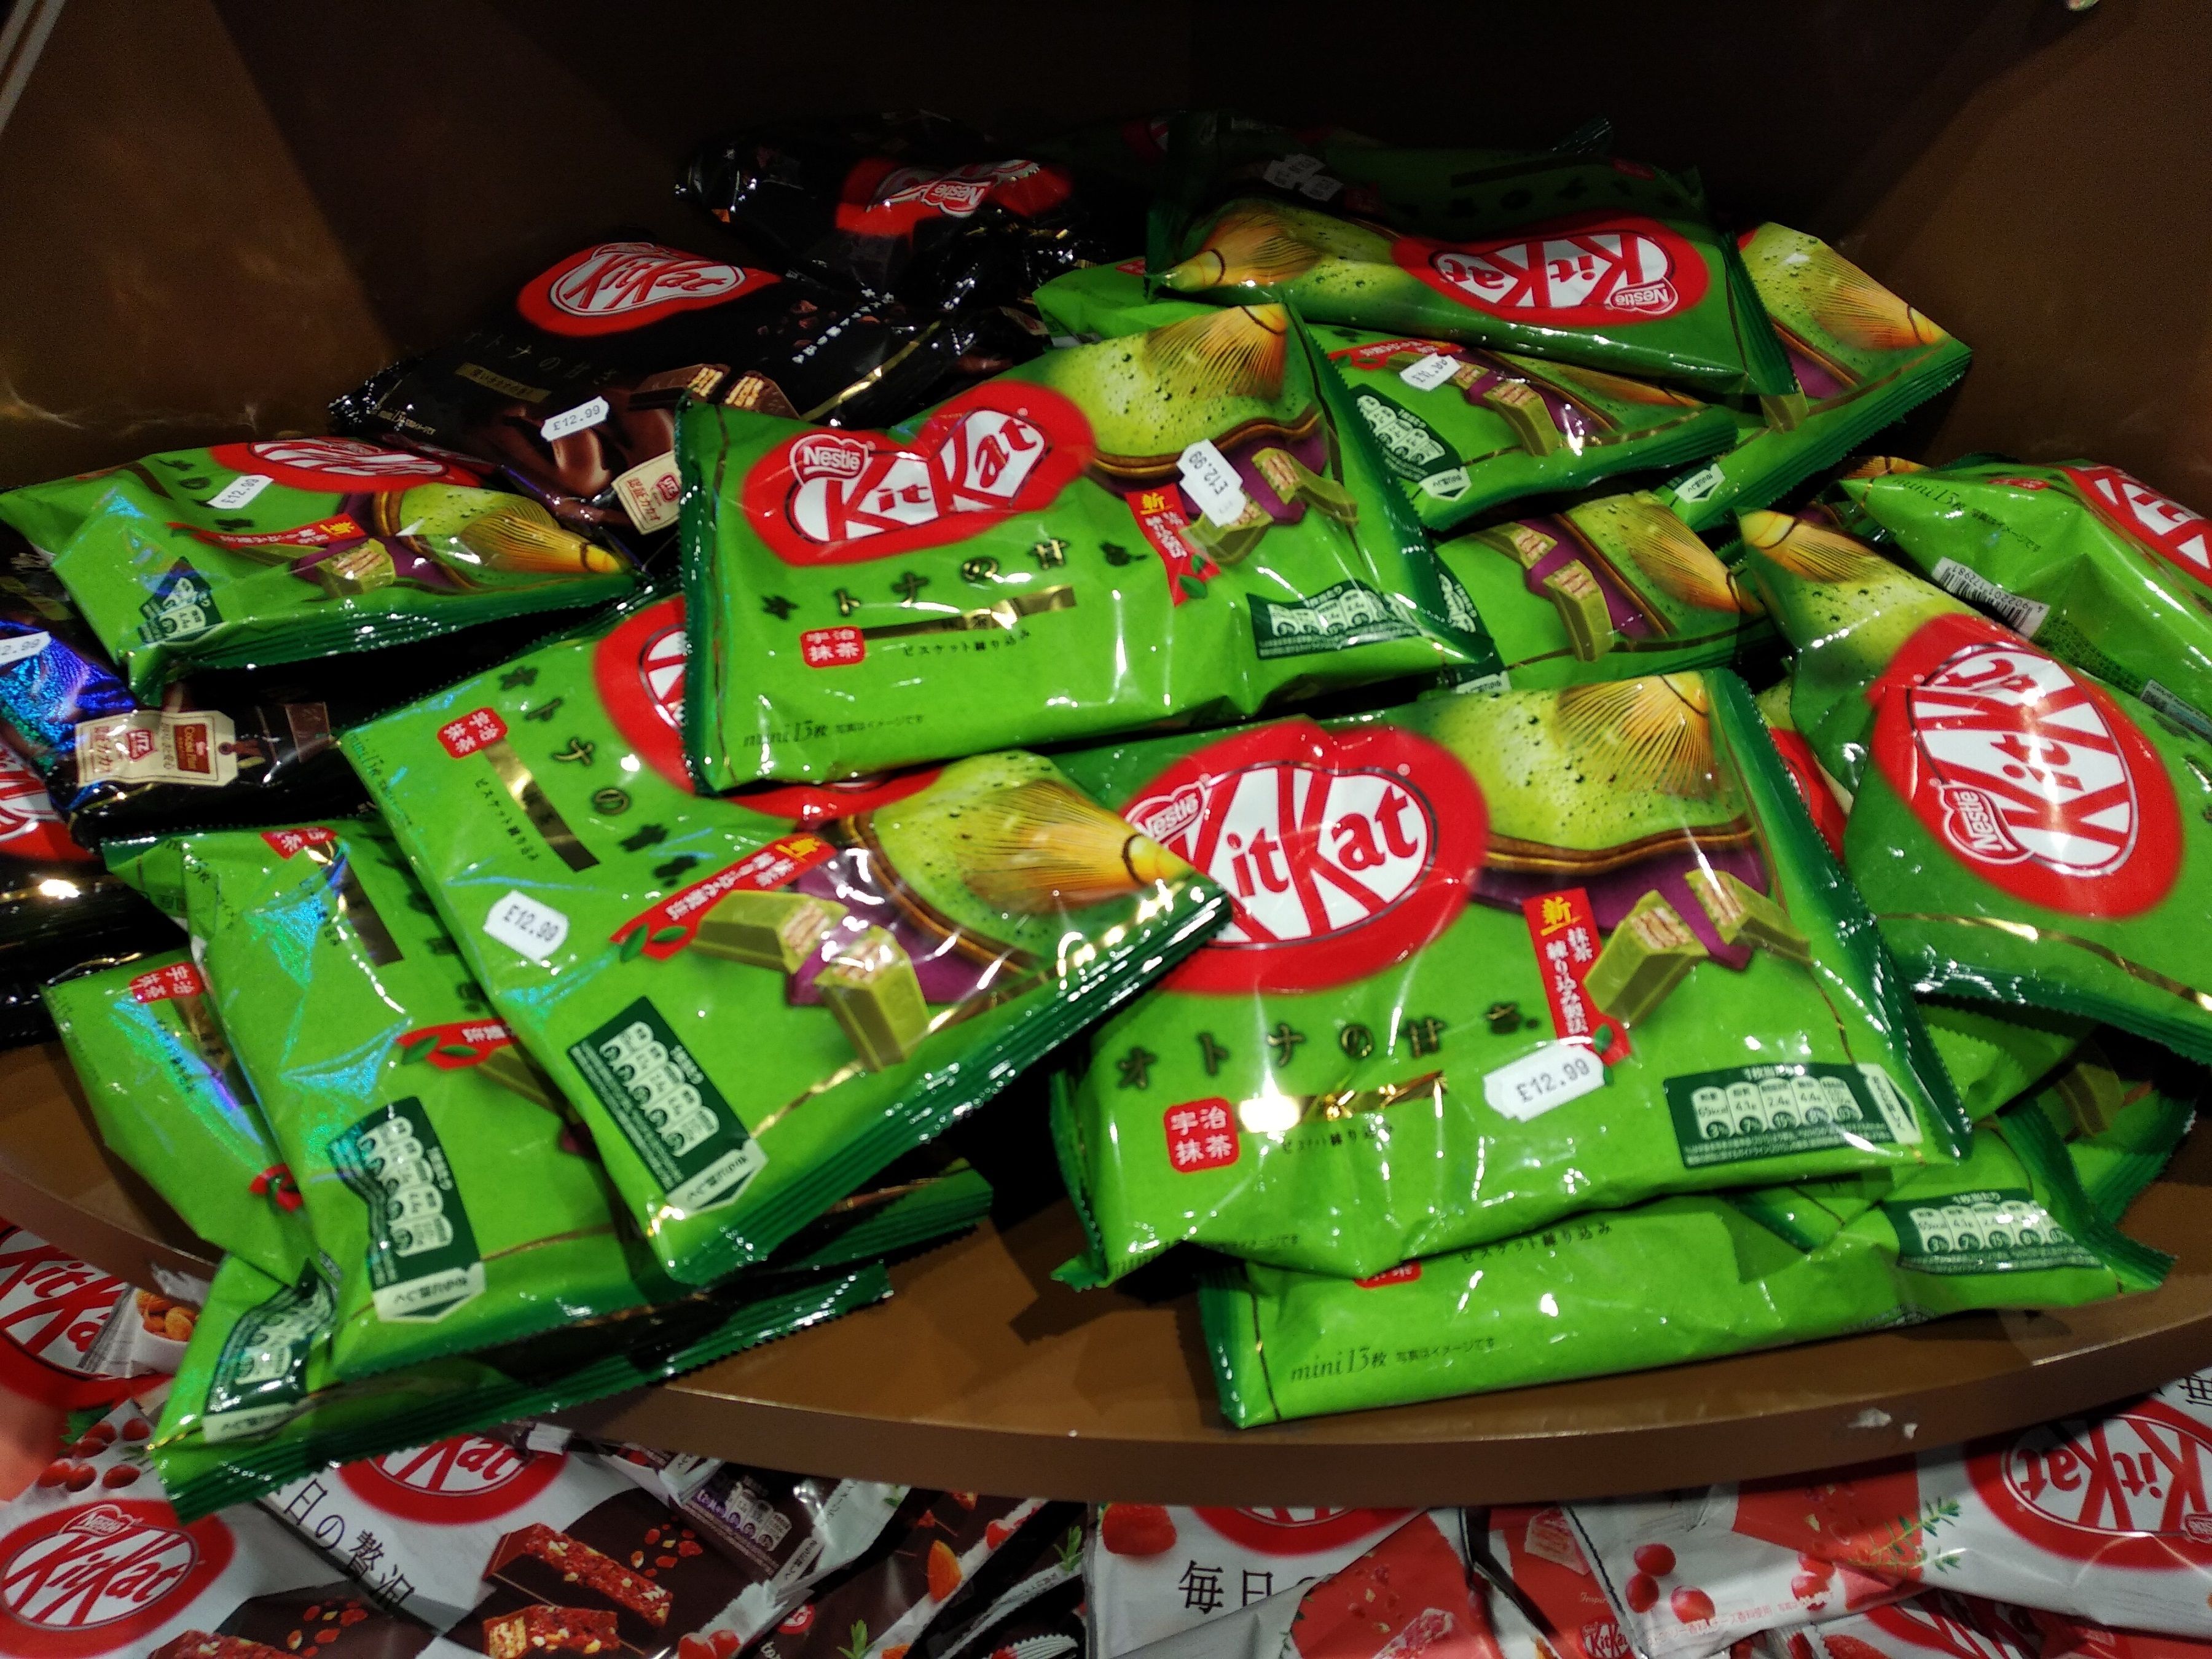 Source: Personal Archive, KitKat flavors from the Japanese section at Kingdom of Sweets. Here's to mention, this is just a small part of the display